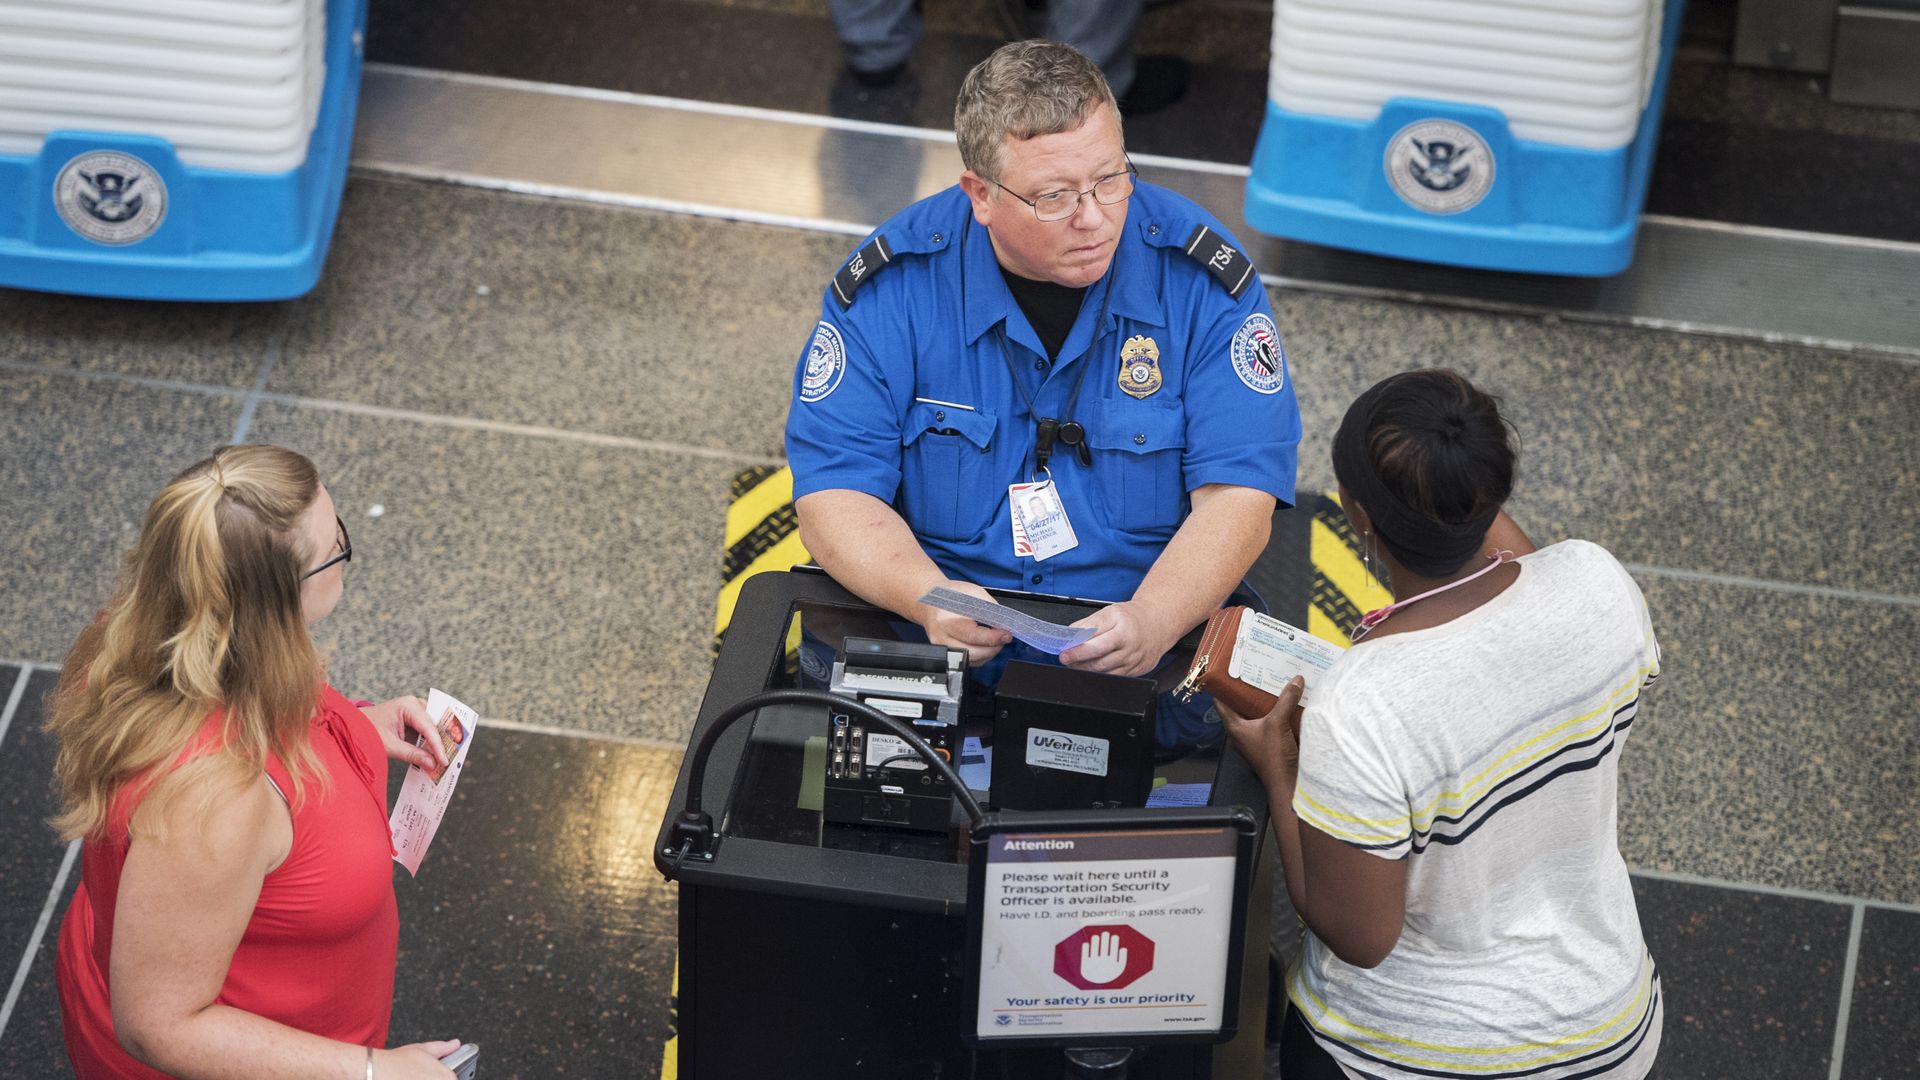 In this image, a TSA officer sits and speaks to a passenger in a white shirt.